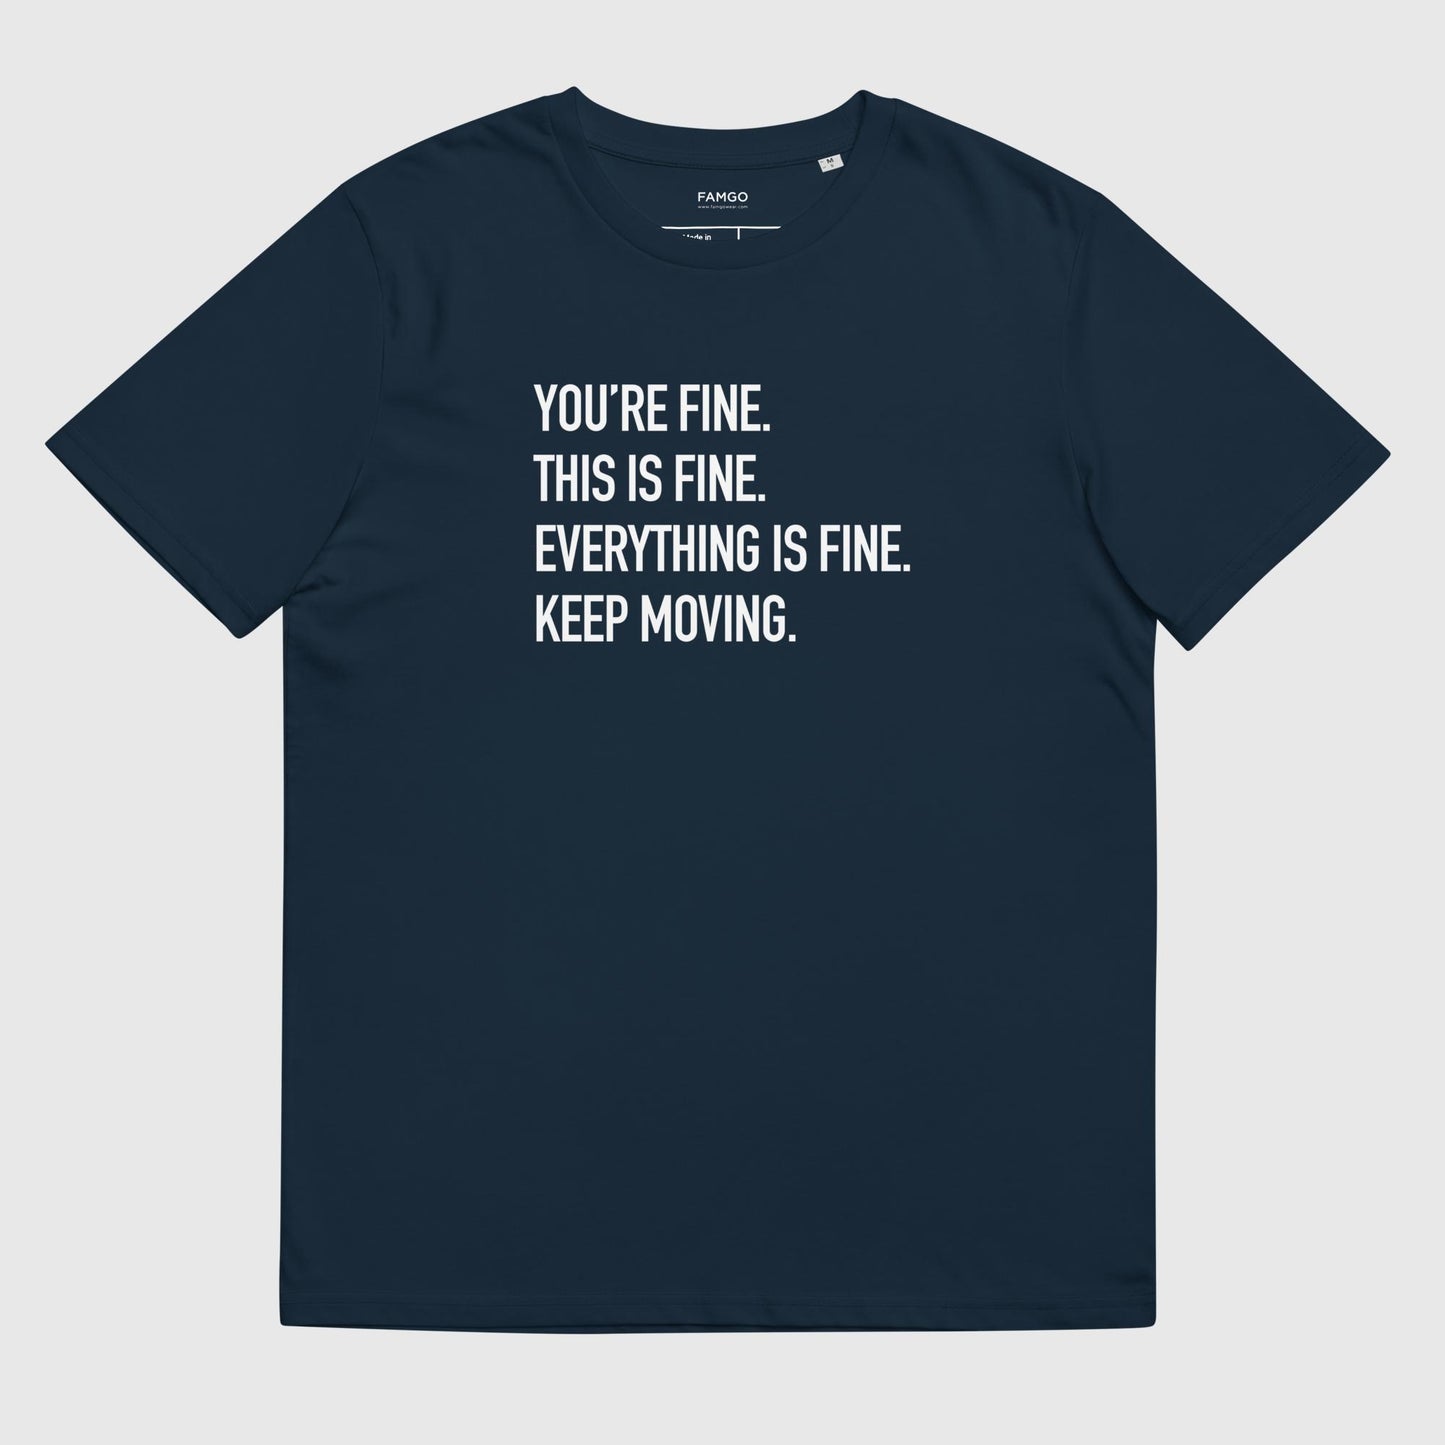 Men's french navy organic cotton t-shirt that features Courtney Dauwalter's mantra, "You're fine. This is fine. Everything is fine. Keep moving."